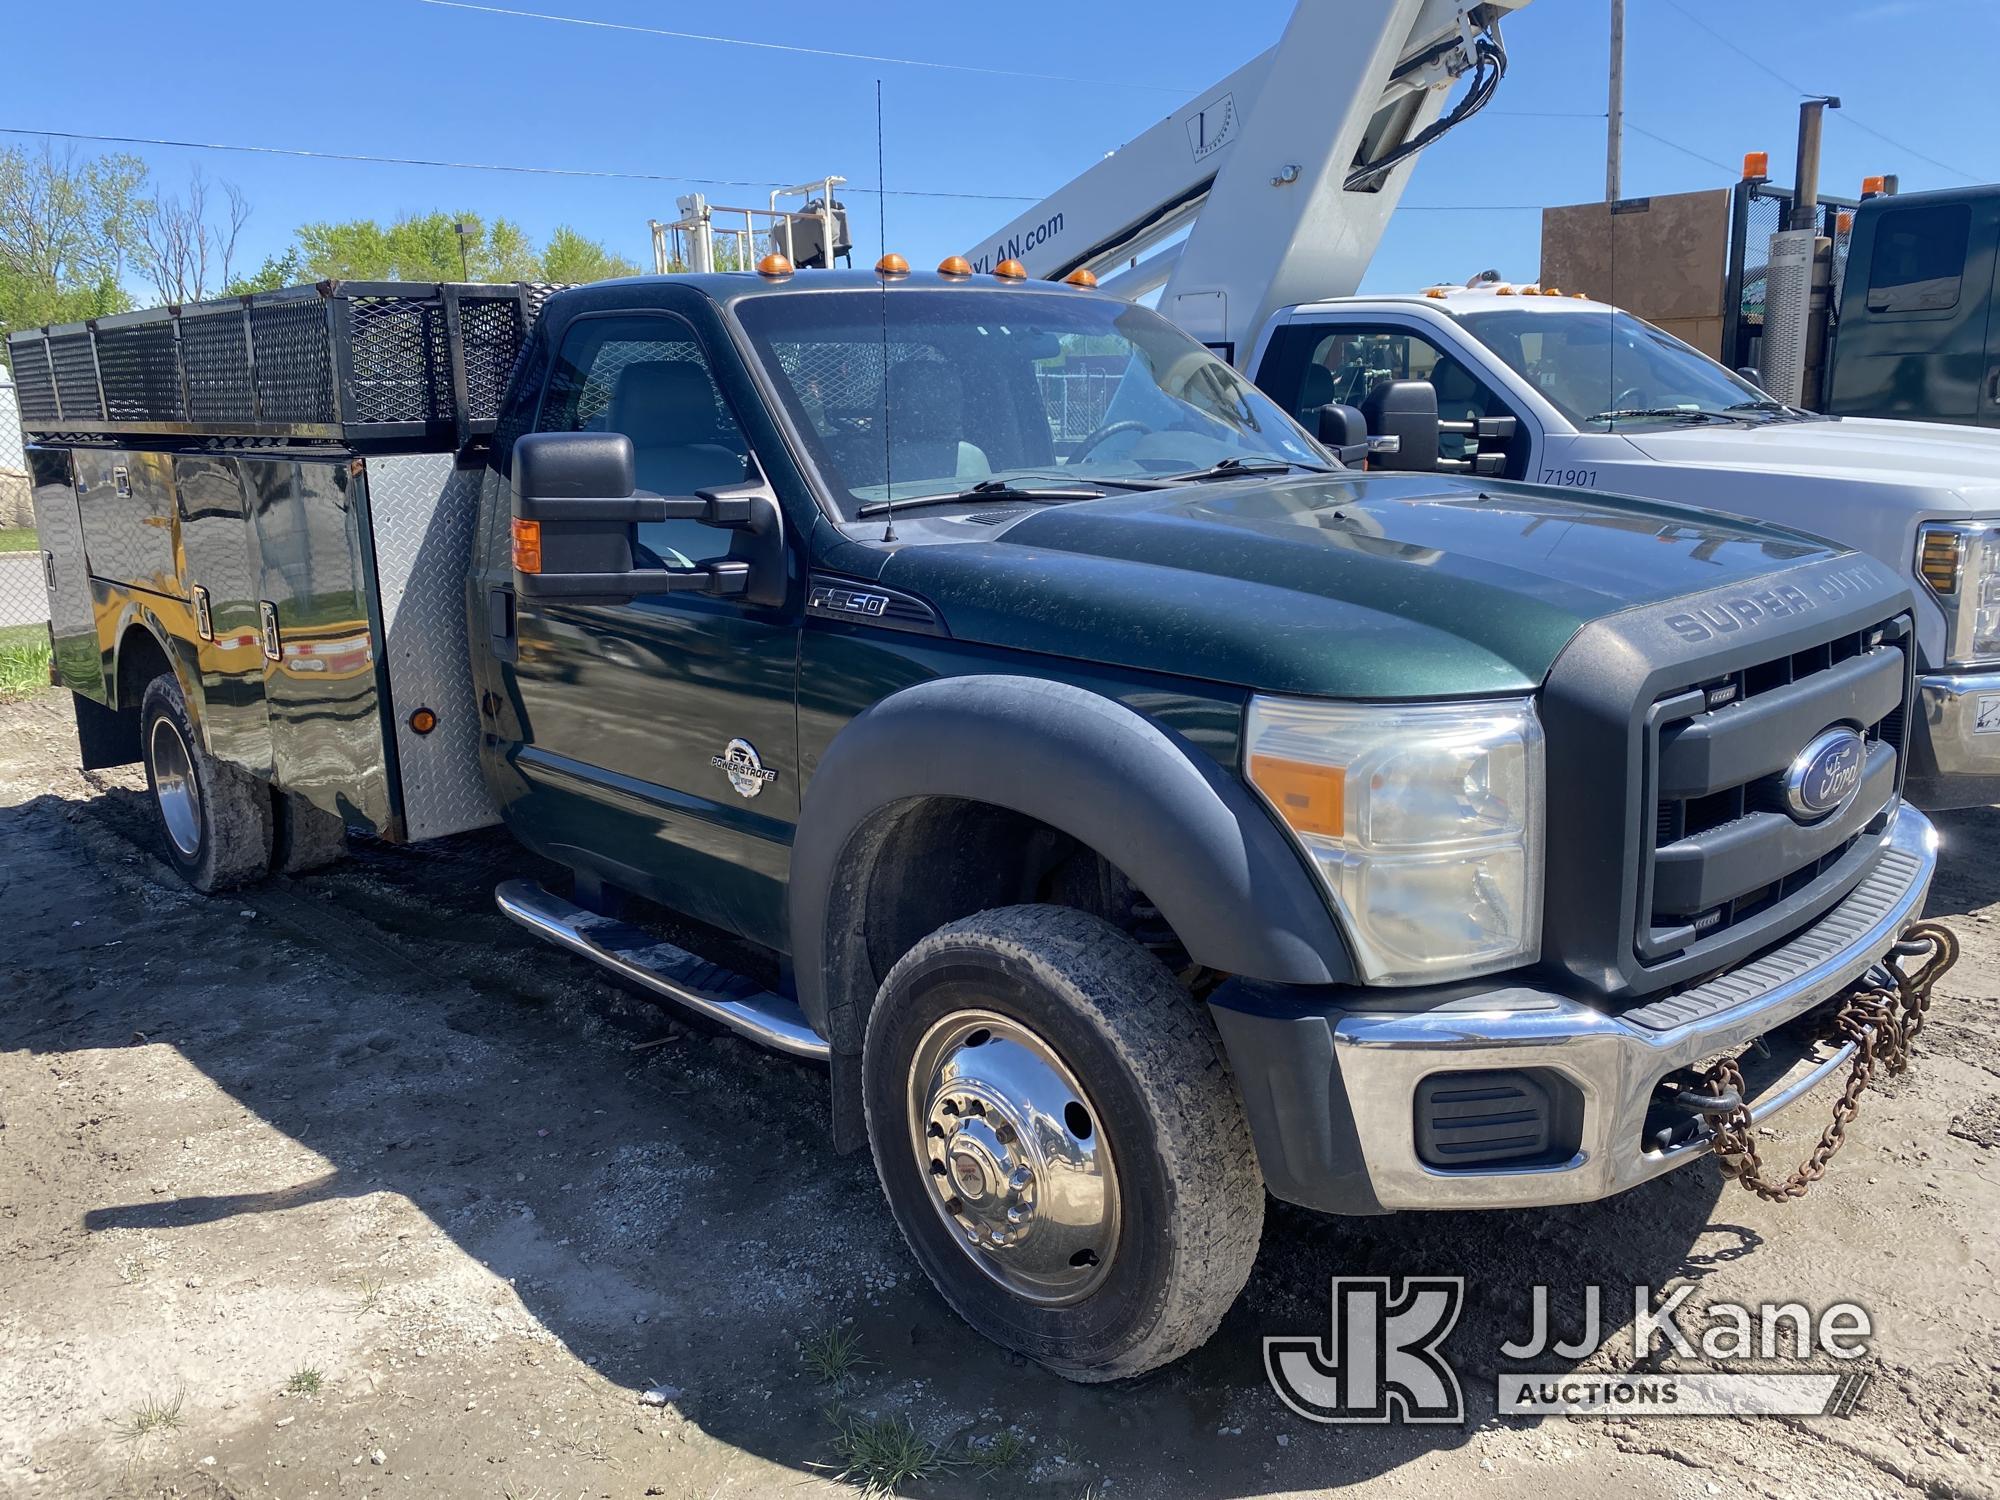 (University Park, IL) 2015 Ford F550 Service Truck Not Running, Condition Unknown, Check Engine Ligh